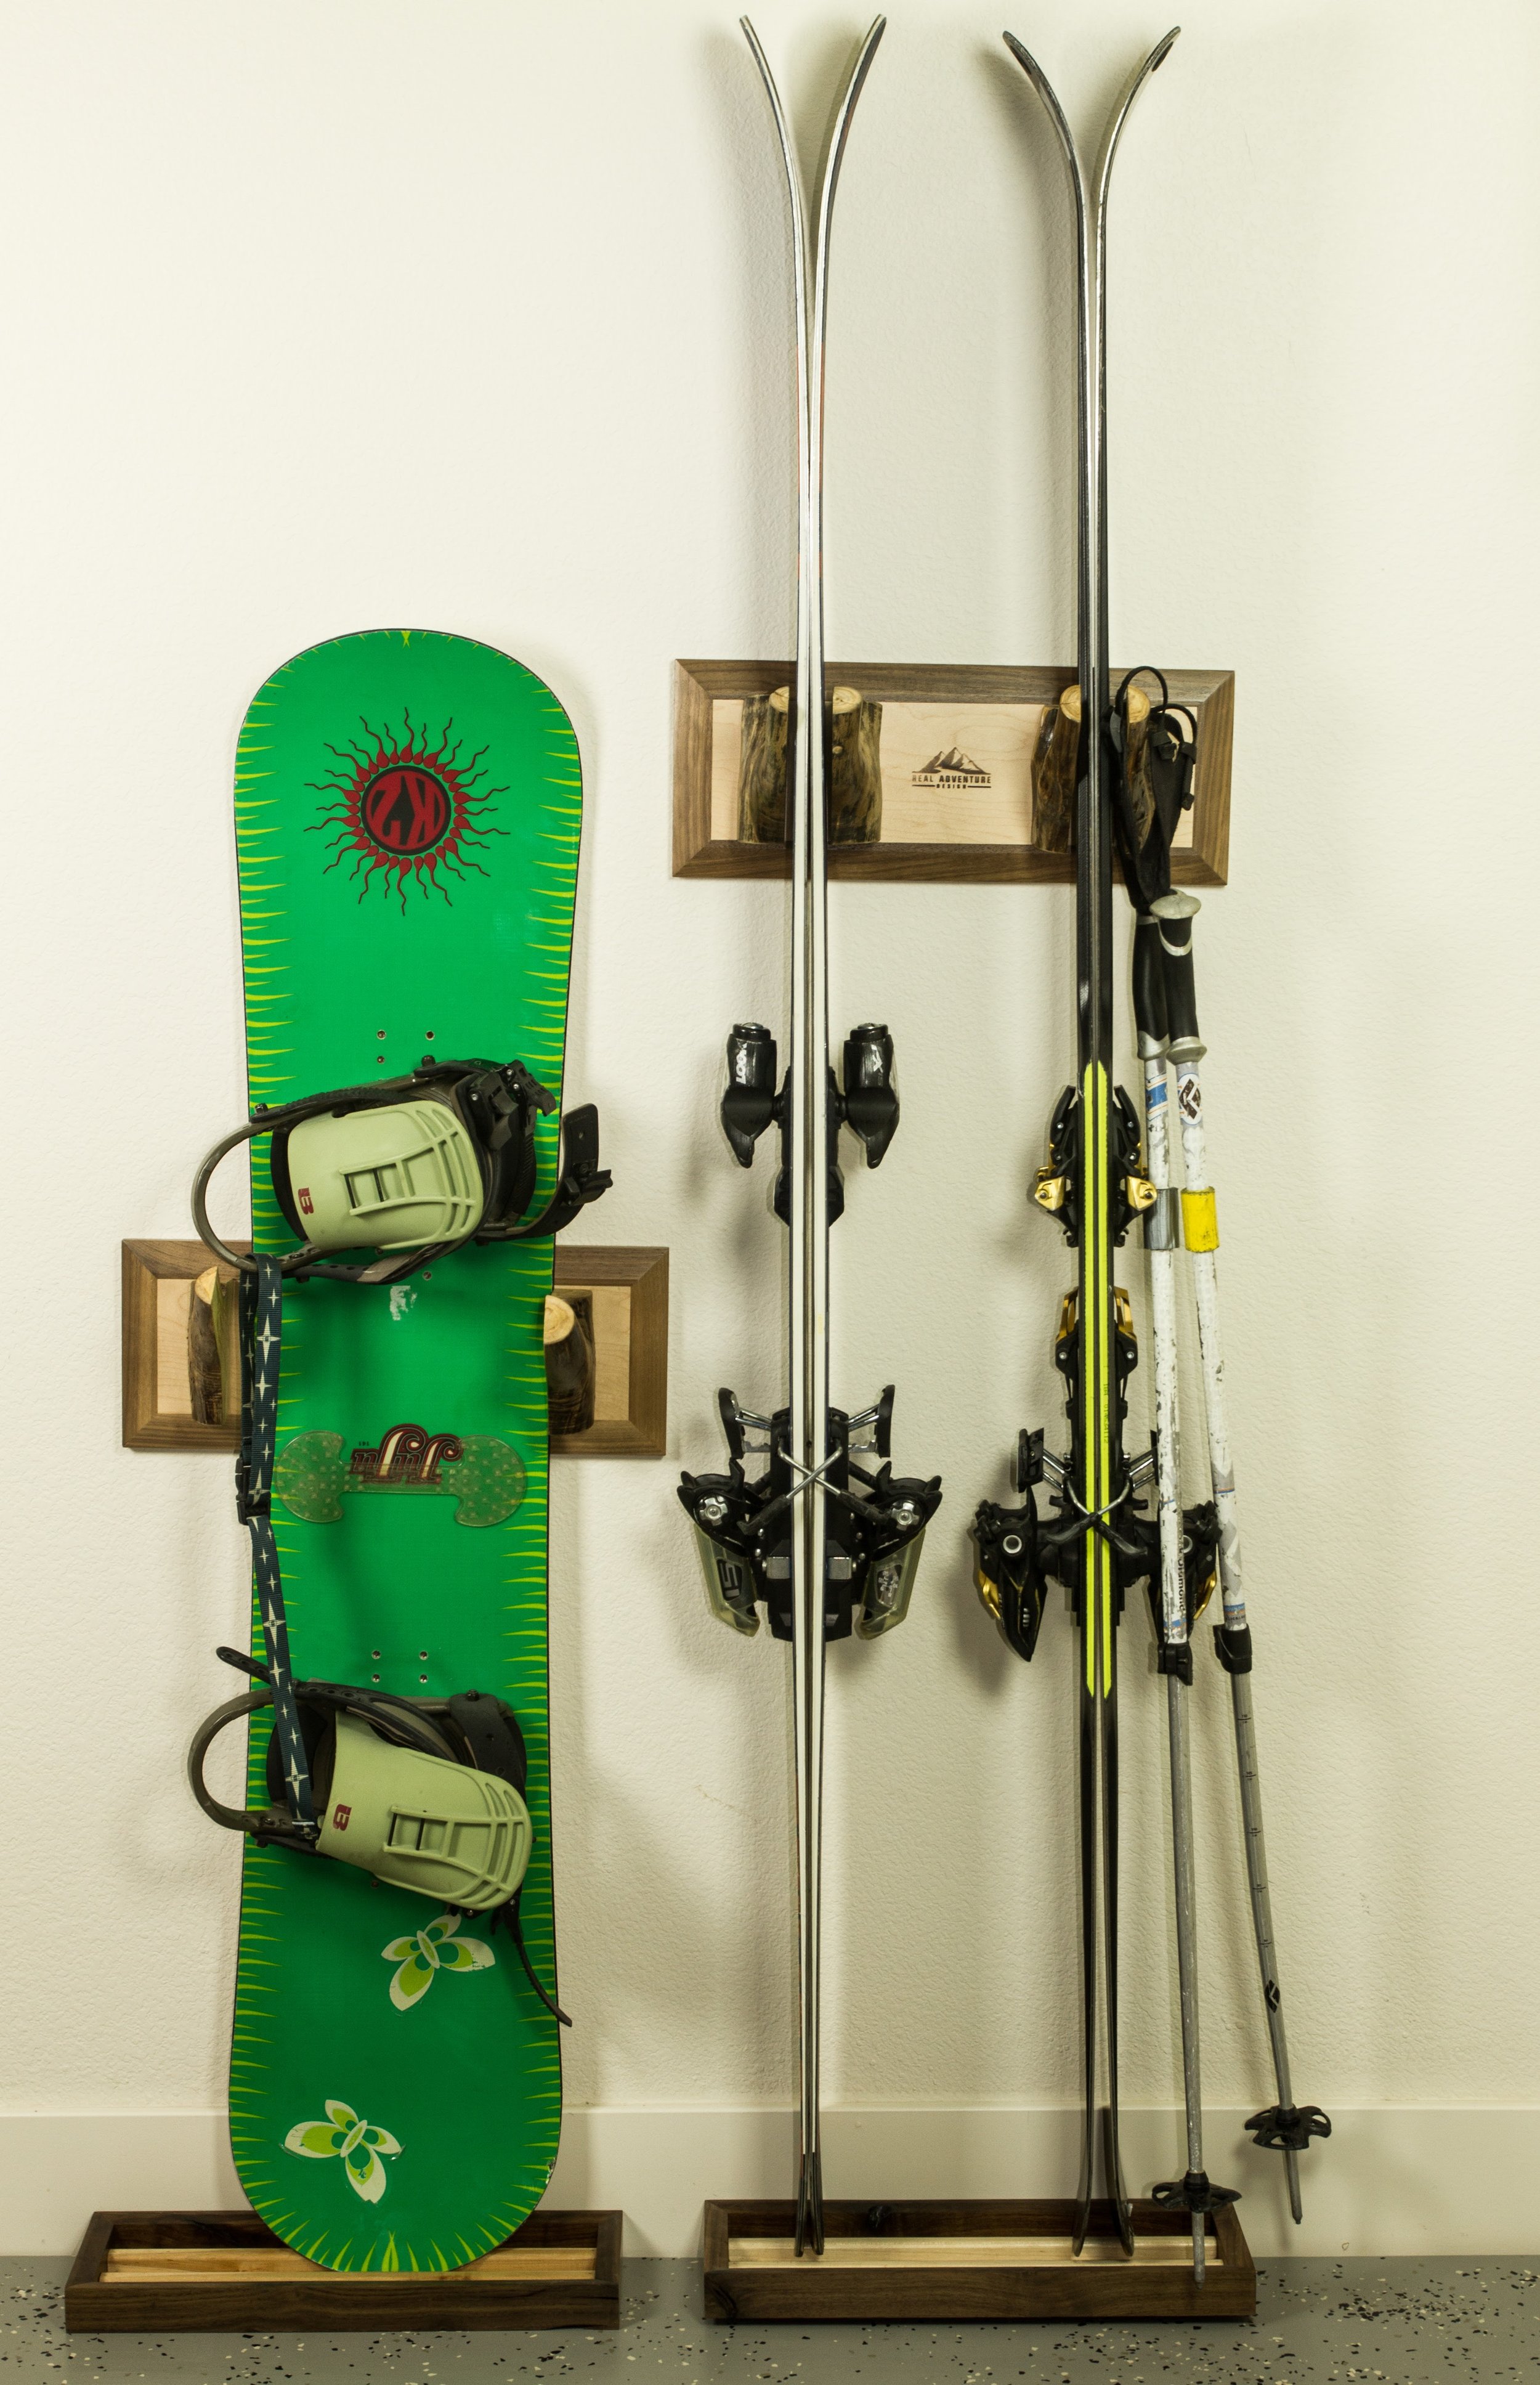  There are two ways to hold a snowboard. 